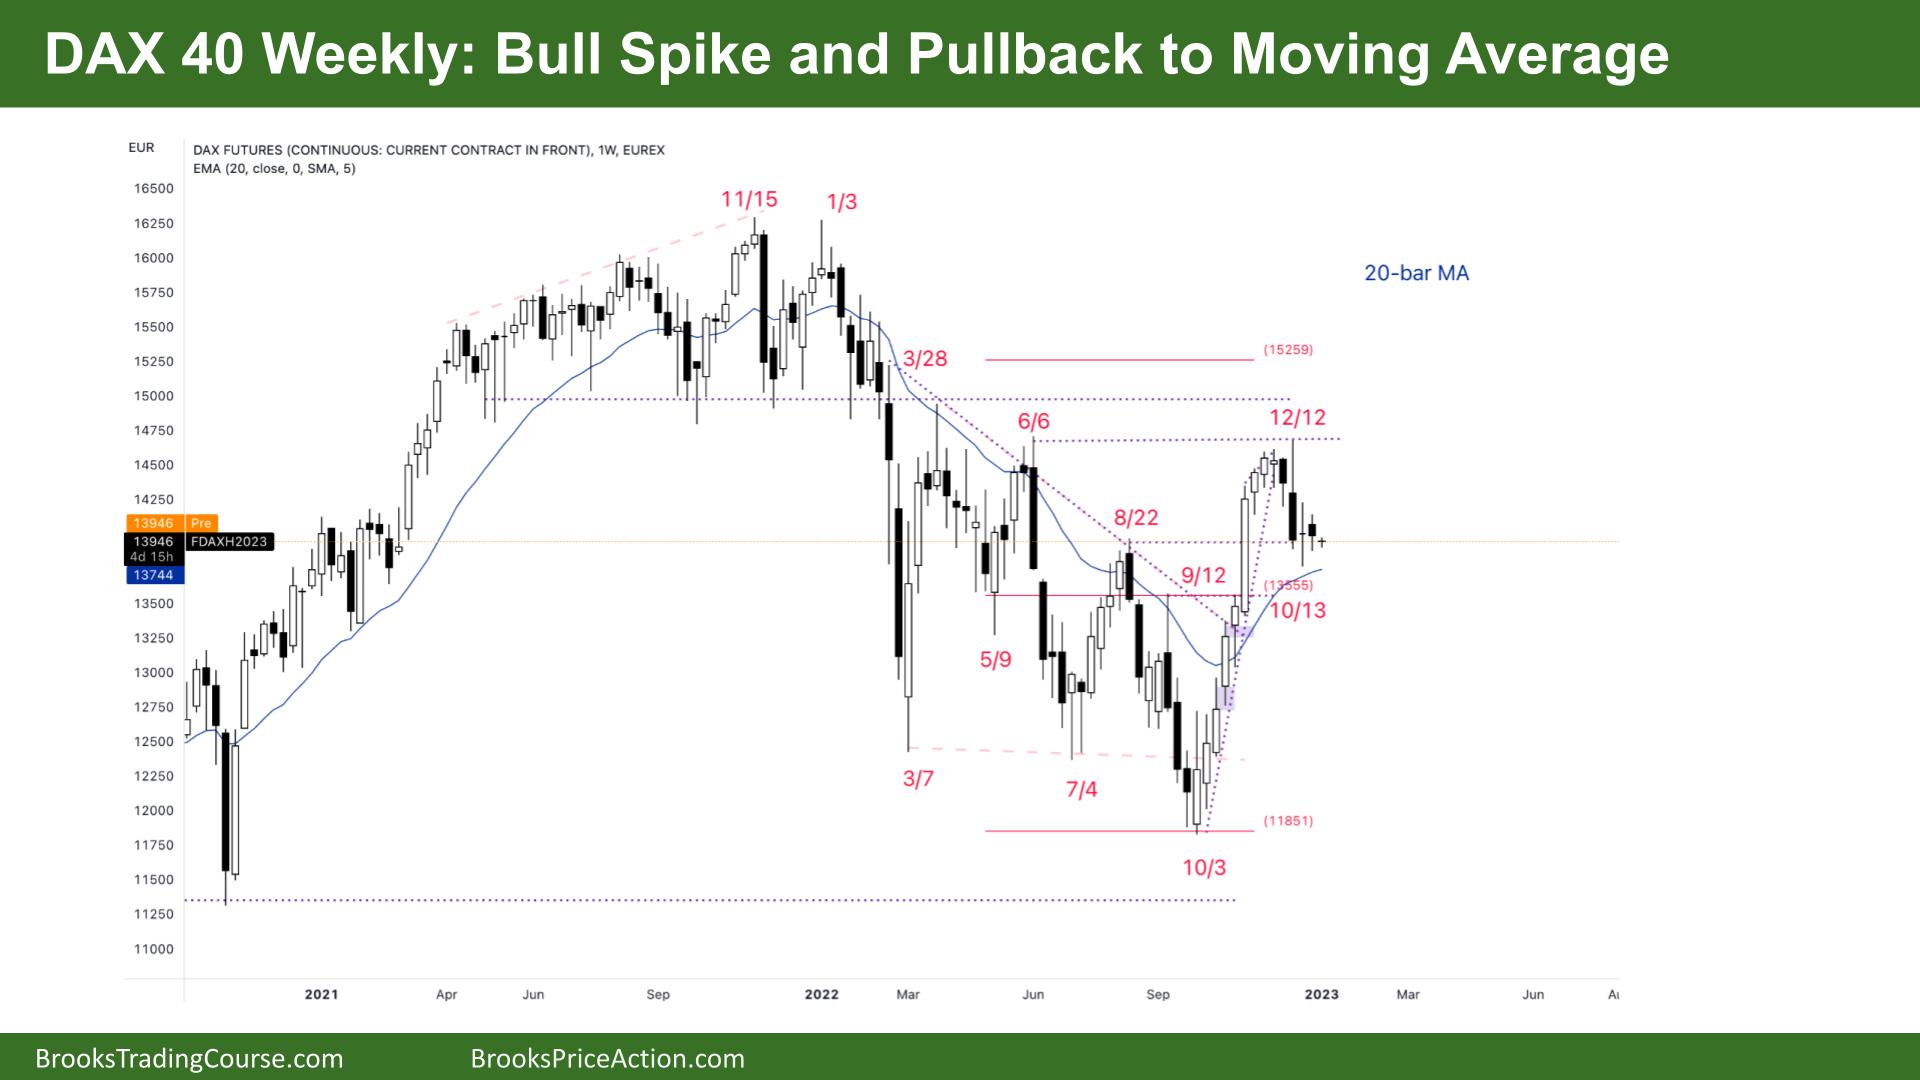 DAX 40 Bull Spike and Pullback to Moving Average